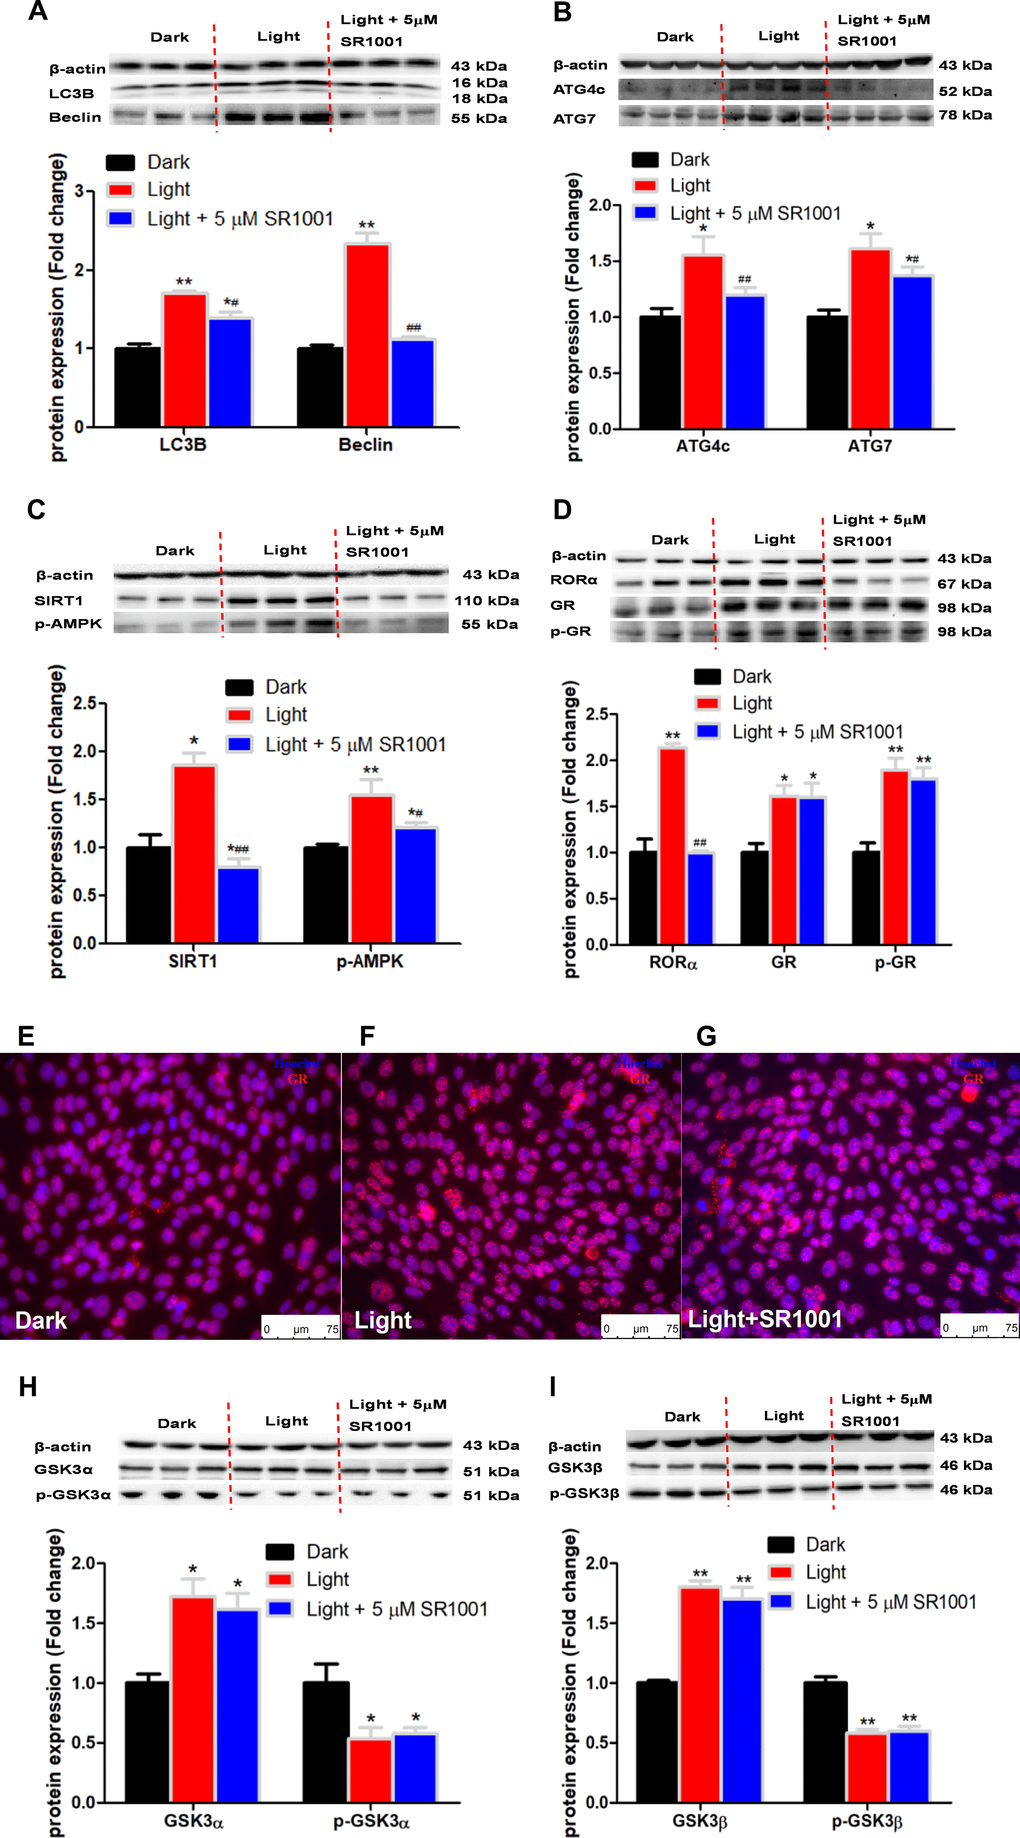 RORα inhibitor, SR1001, rescues the expression of autophagy-related proteins, yet not GSK3α, GSK-3β and GR in light-exposed HT-22 cells. (A–D) Protein content of LC3B, Beclin, ATG4c, ATG7, SIRT1, phospho-AMPK, RORα, GR and phospho-GR. RORα inhibitor SR1001 completely rectified light-induced up-regulation of RORα and autophagy-related proteins, including LC3B, Beclin, ATG4c, ATG7, SIRT1 and phospho-AMPK, in HT-22 cells. However, increases in GR and phospho-GR protein expression were not rectified by SR1001. Values are means ± SEM, *p p #p ##p E–G) Immunofluorescence of GR, showing that SR1001 was not able to restore light-induced GR activation and GR nuclear translocation. The nuclei were stained with Hoechst (blue) and GR was stained with GR antibody (red). Scale bars, 75 μm; (H–I) Protein content of total and phospho-GSK-3α/β (Ser21/9). Light-induced increase in total GSK-3α/β and decrease in phospho-GSK-3α/β were not rescued by SR1001. Values are means ± SEM, *p p 